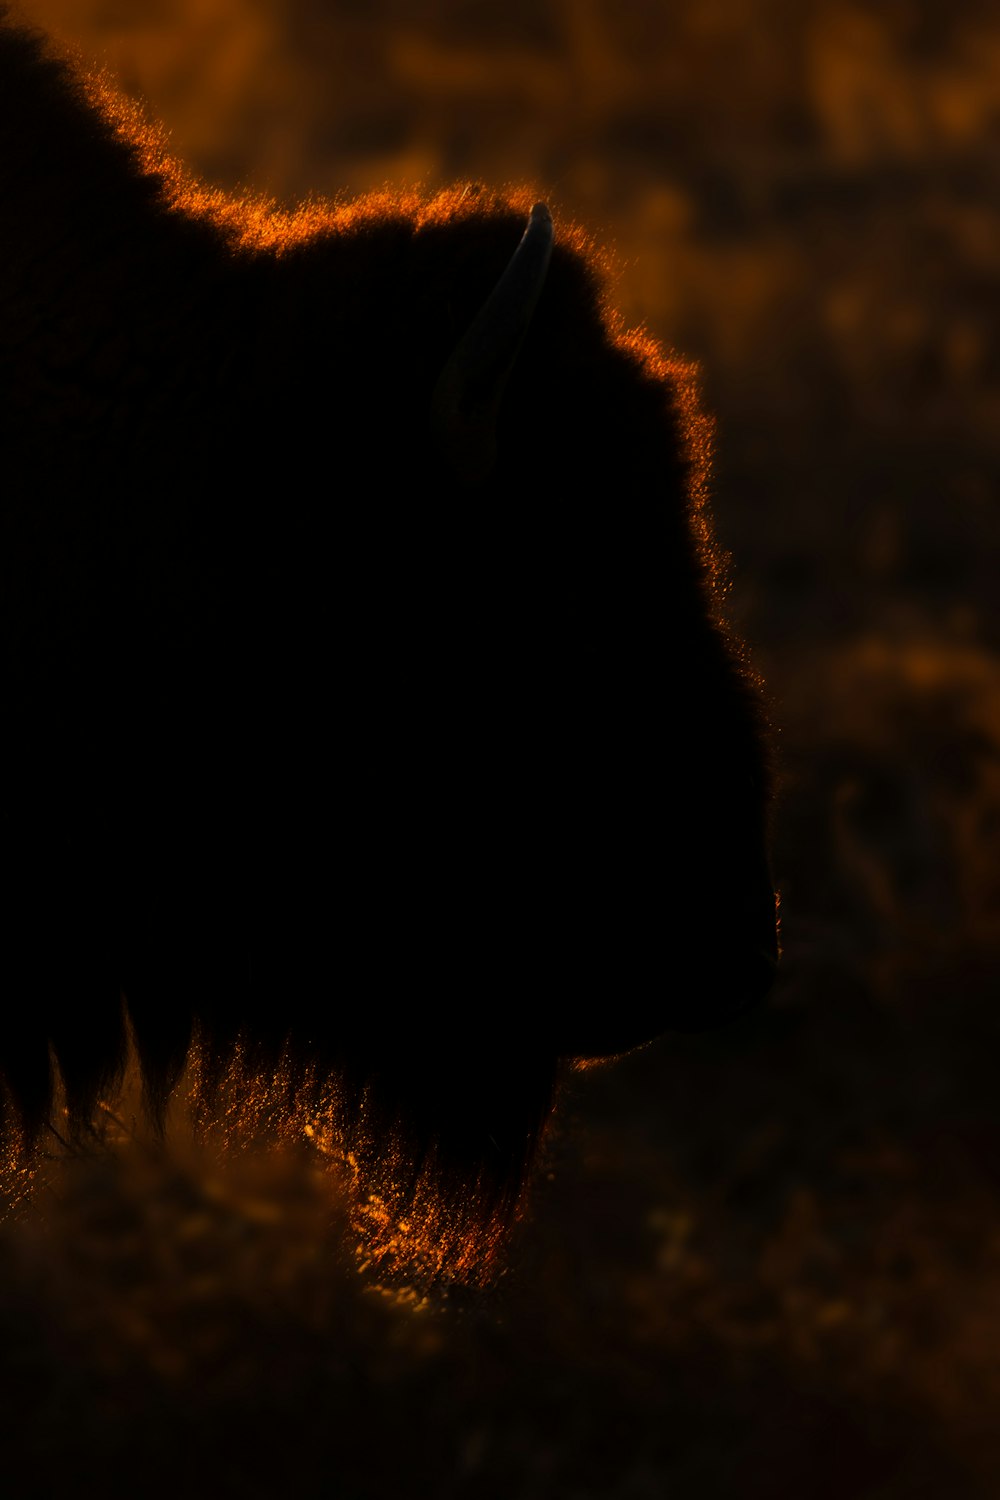 a close up of a bison's head at sunset